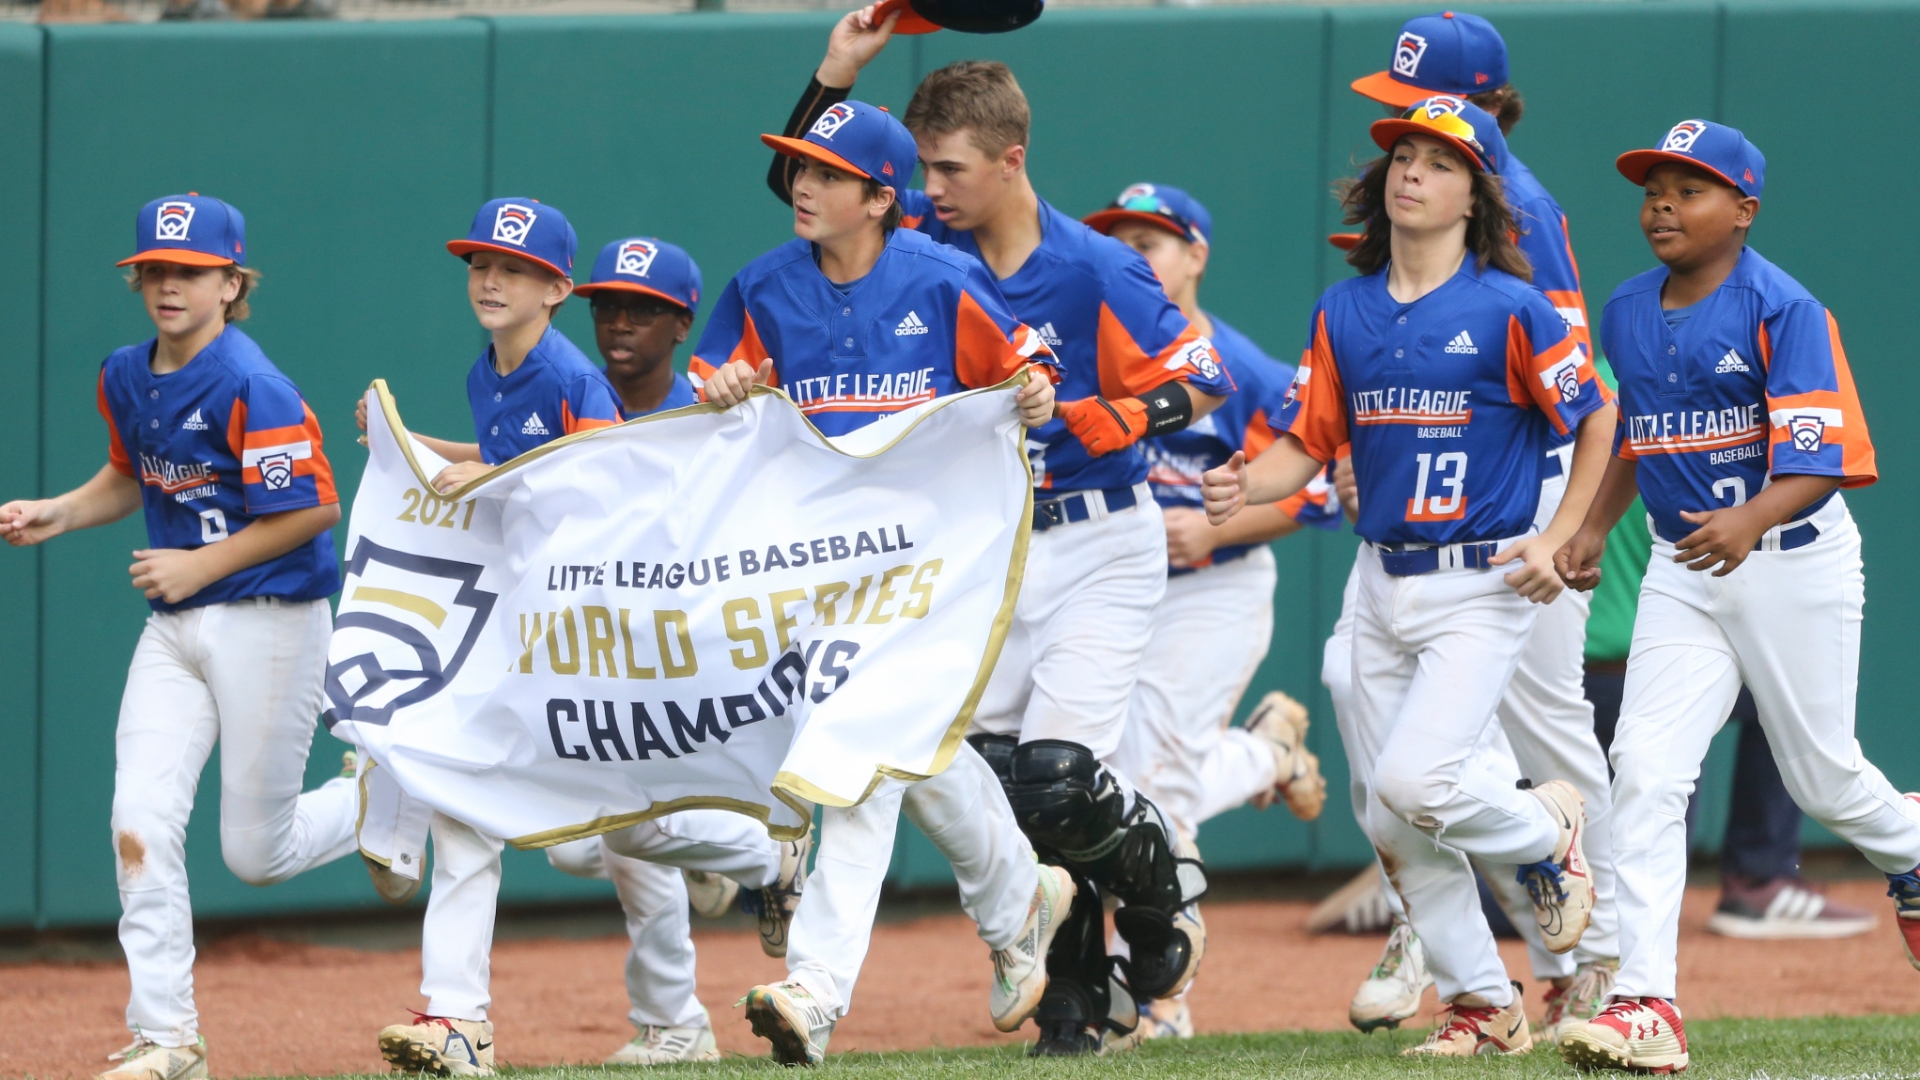 The top moments from the final day at the LLWS